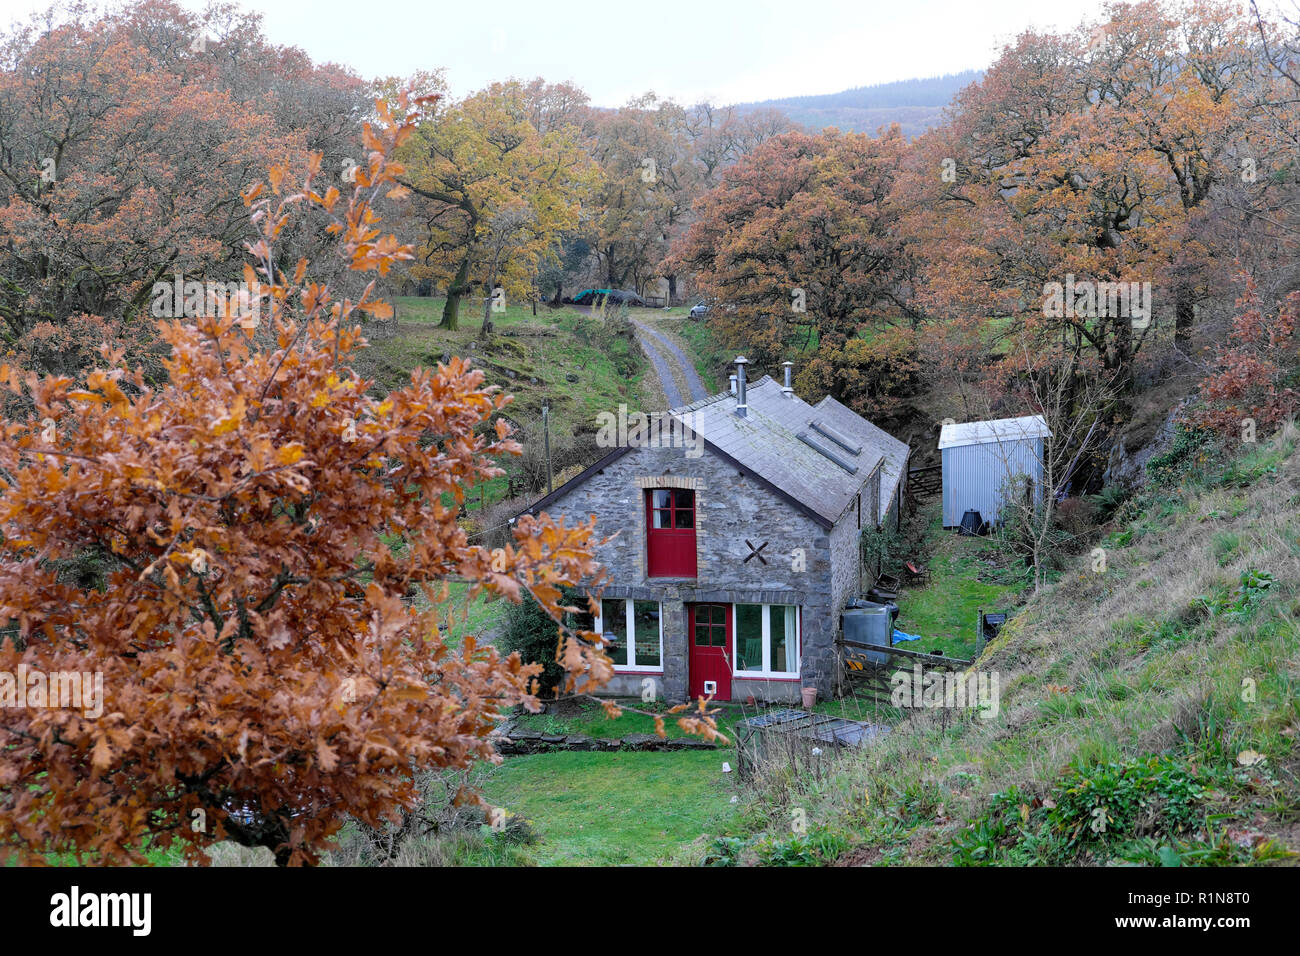 View of a converted barn house home stone cottage in autumn in rural  countryside with oak trees and oak leaves Carmarthenshire Wales UK  KATHY DEWITT Stock Photo